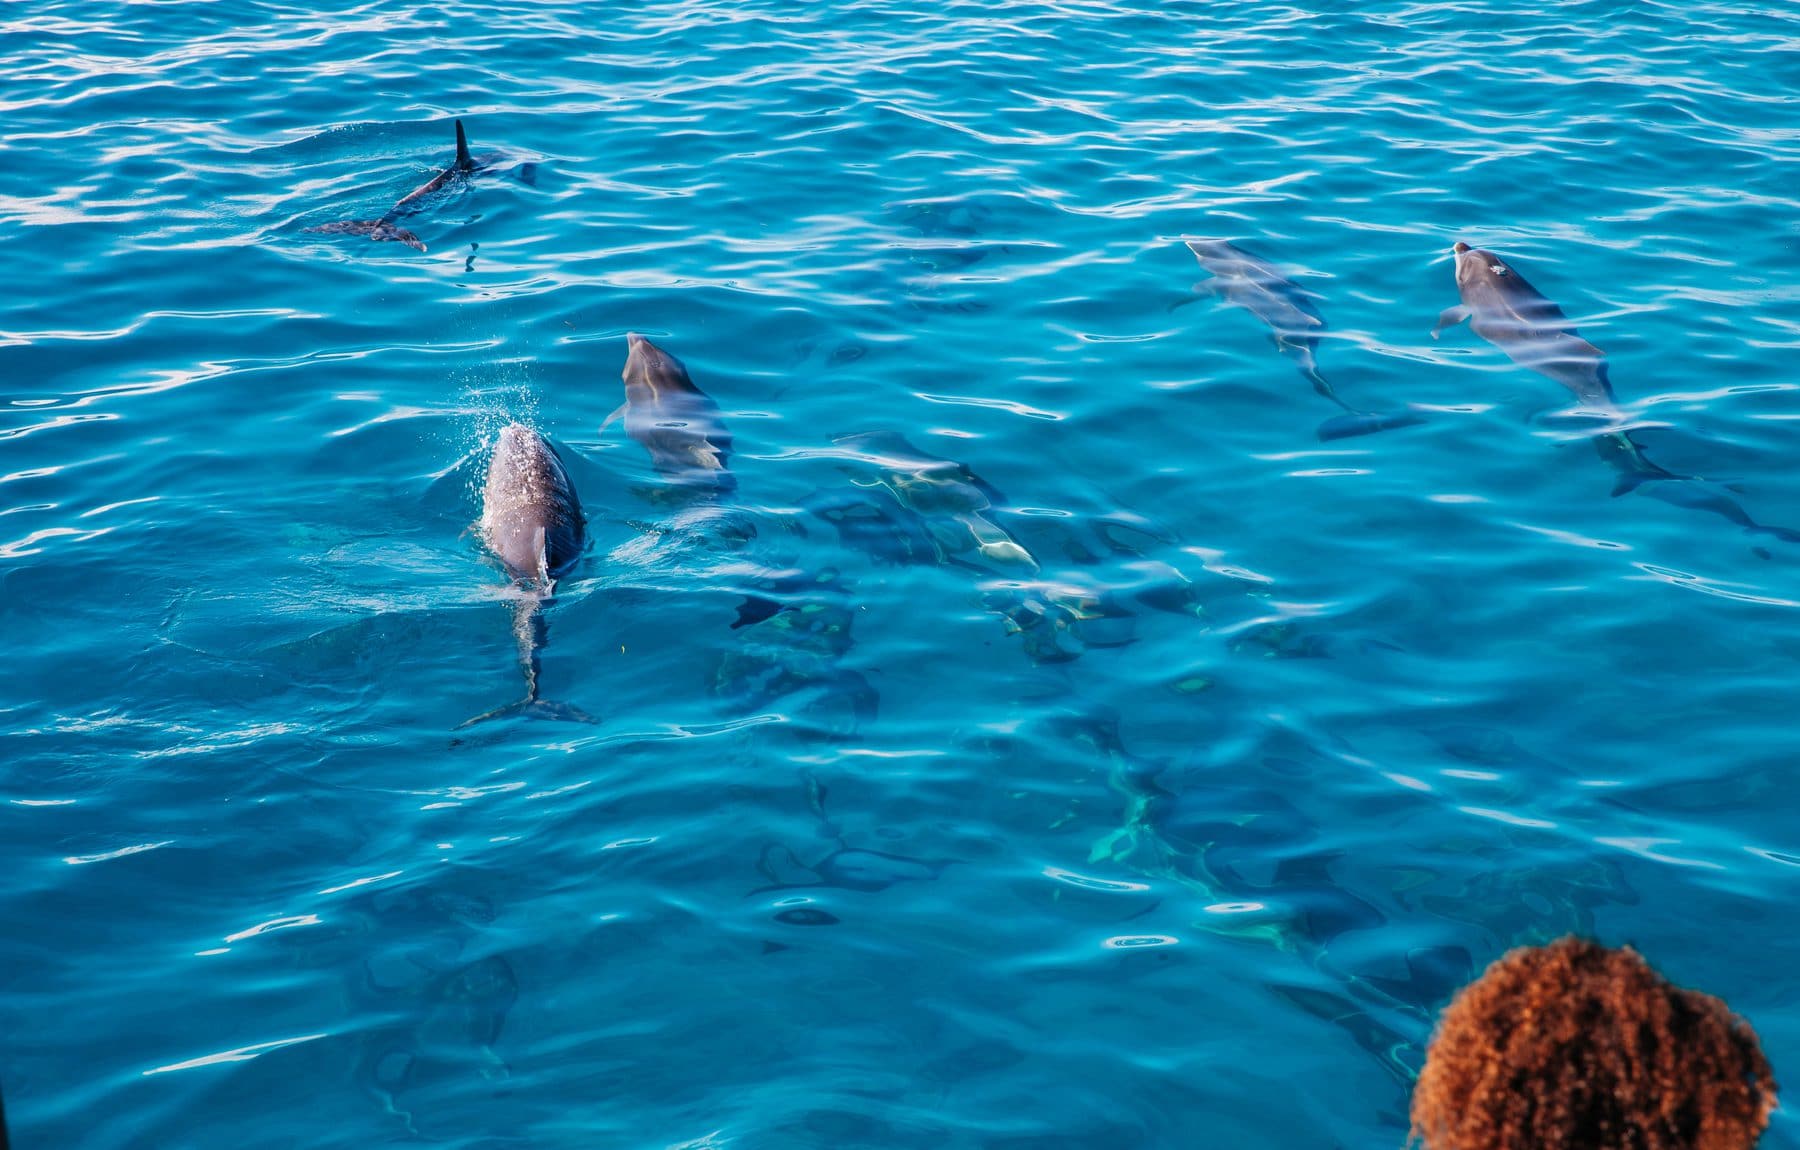 Dolphins in the Maldives - Travelling to Soneva resorts